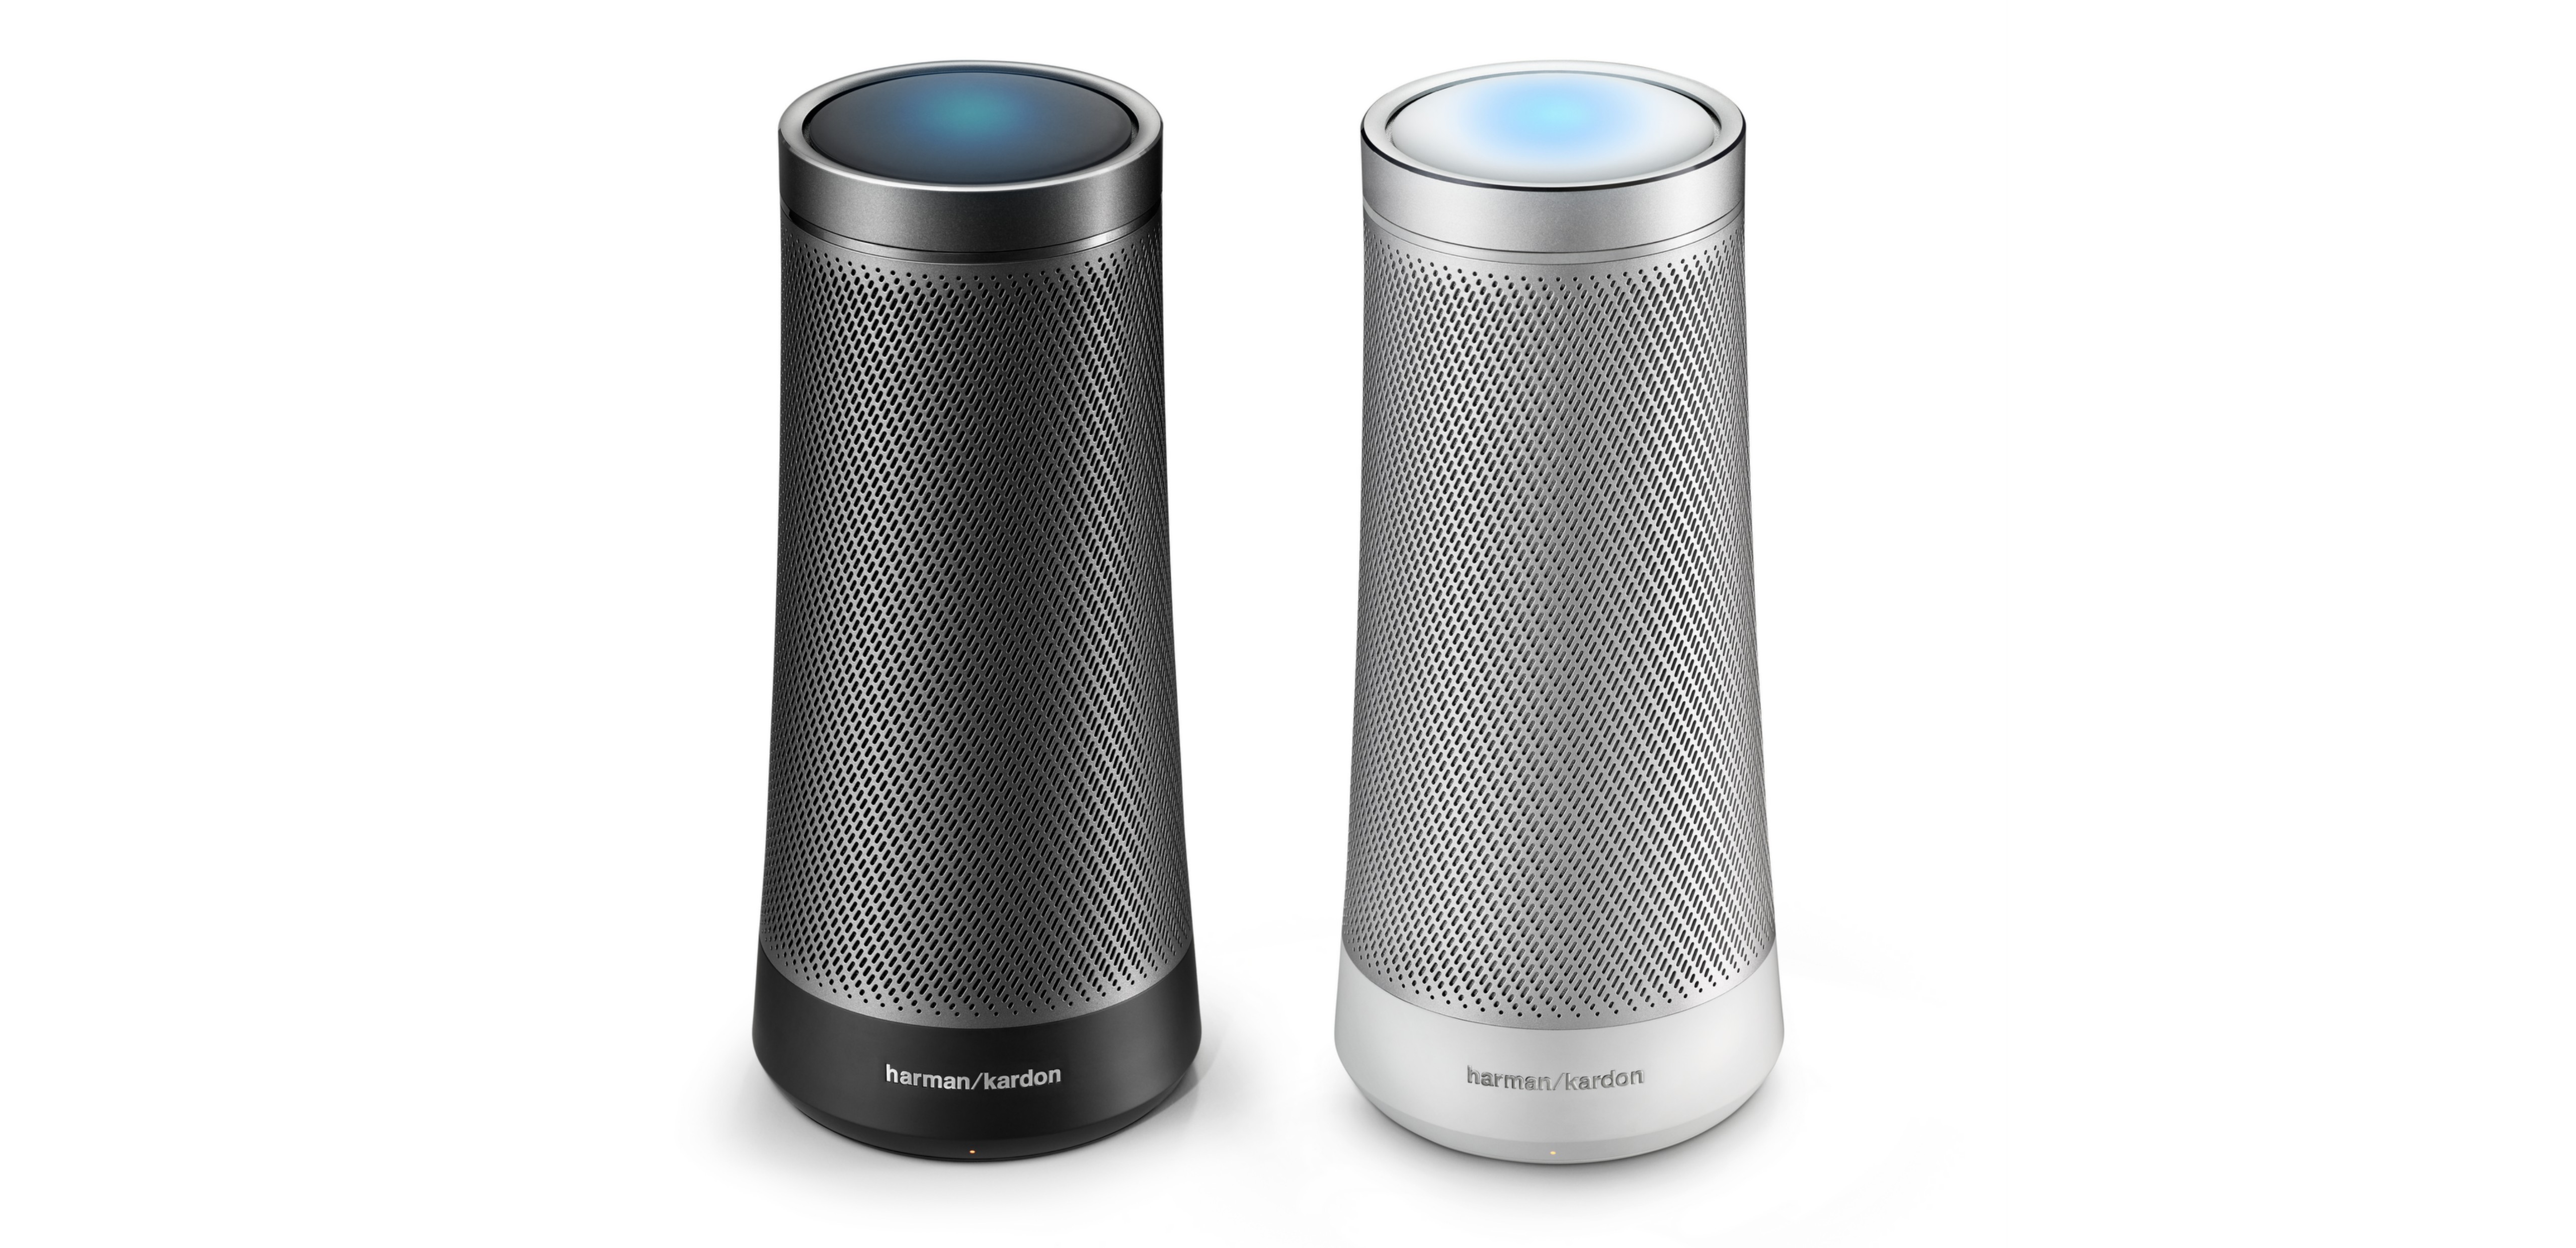 Product shot of two Harman Kardon Invoke speakers on a white background side by side, one is black in color and the other is white.